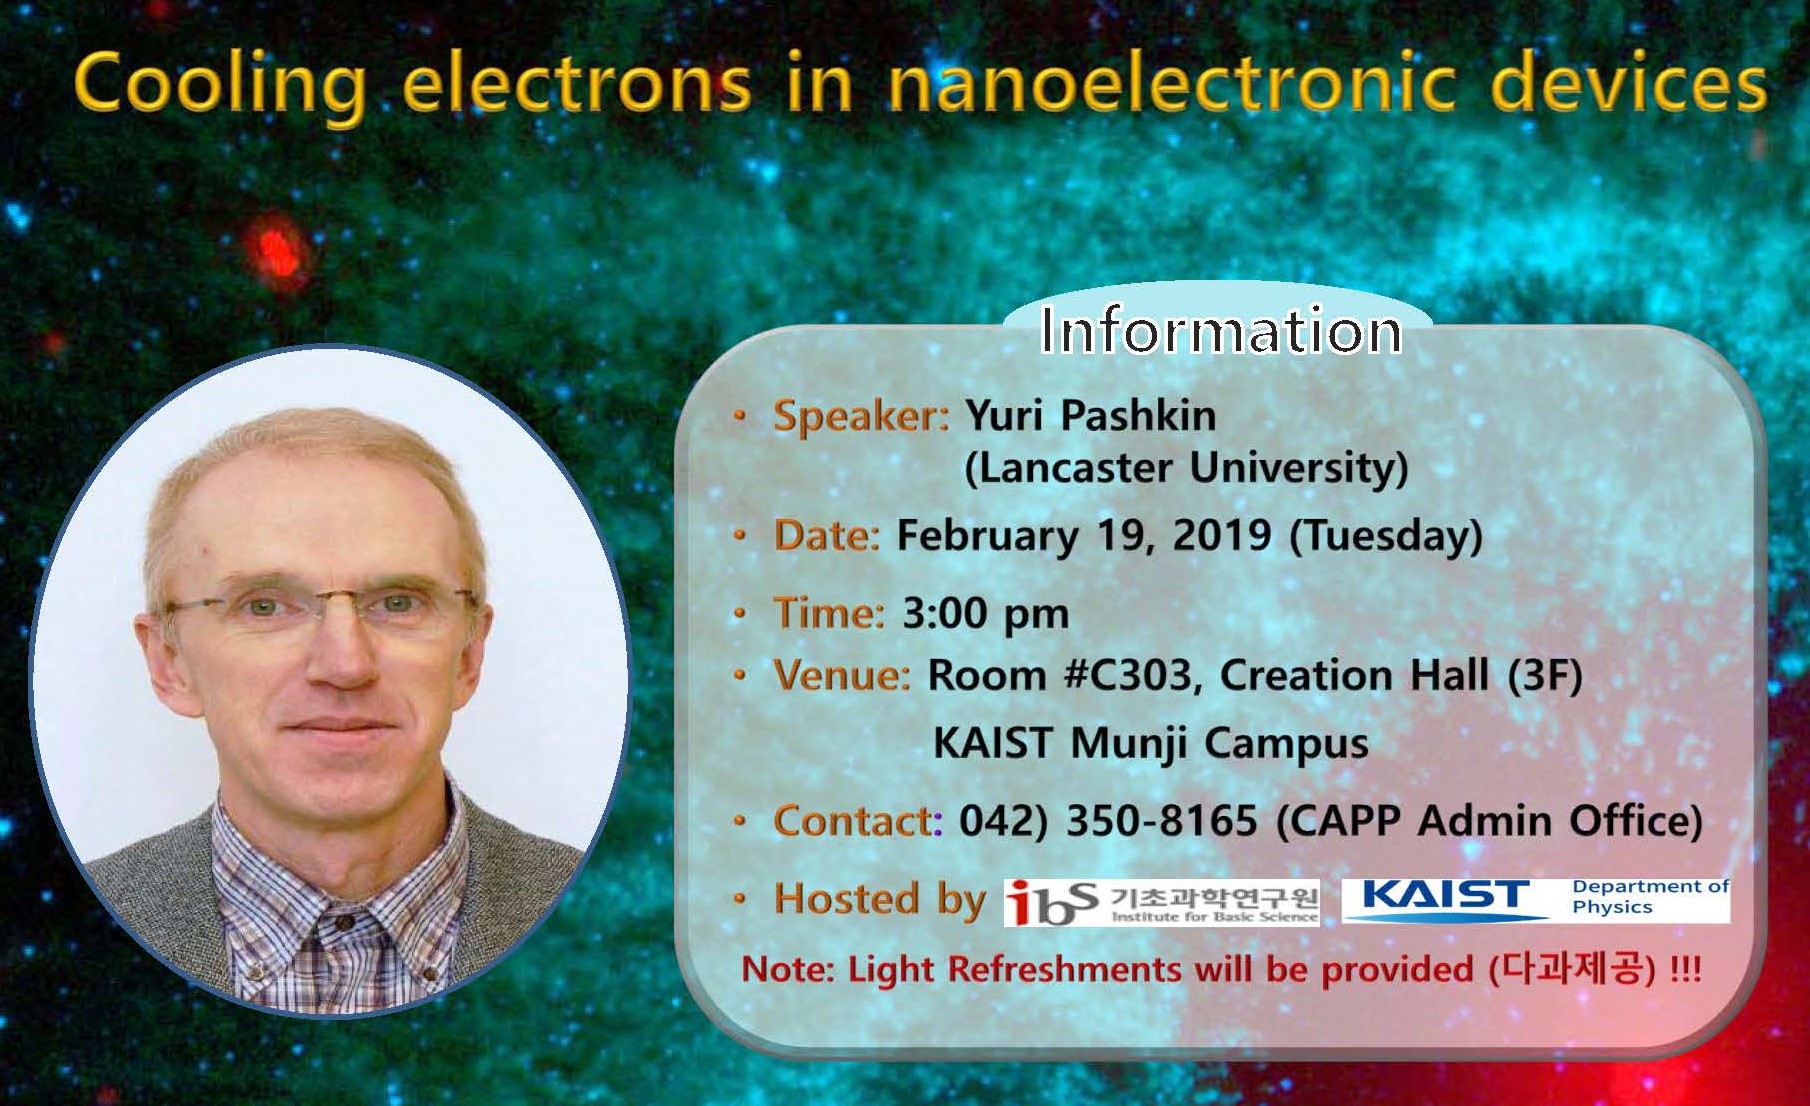 [CAPP 세미나] Cooling electrons in nanoelectronic devices